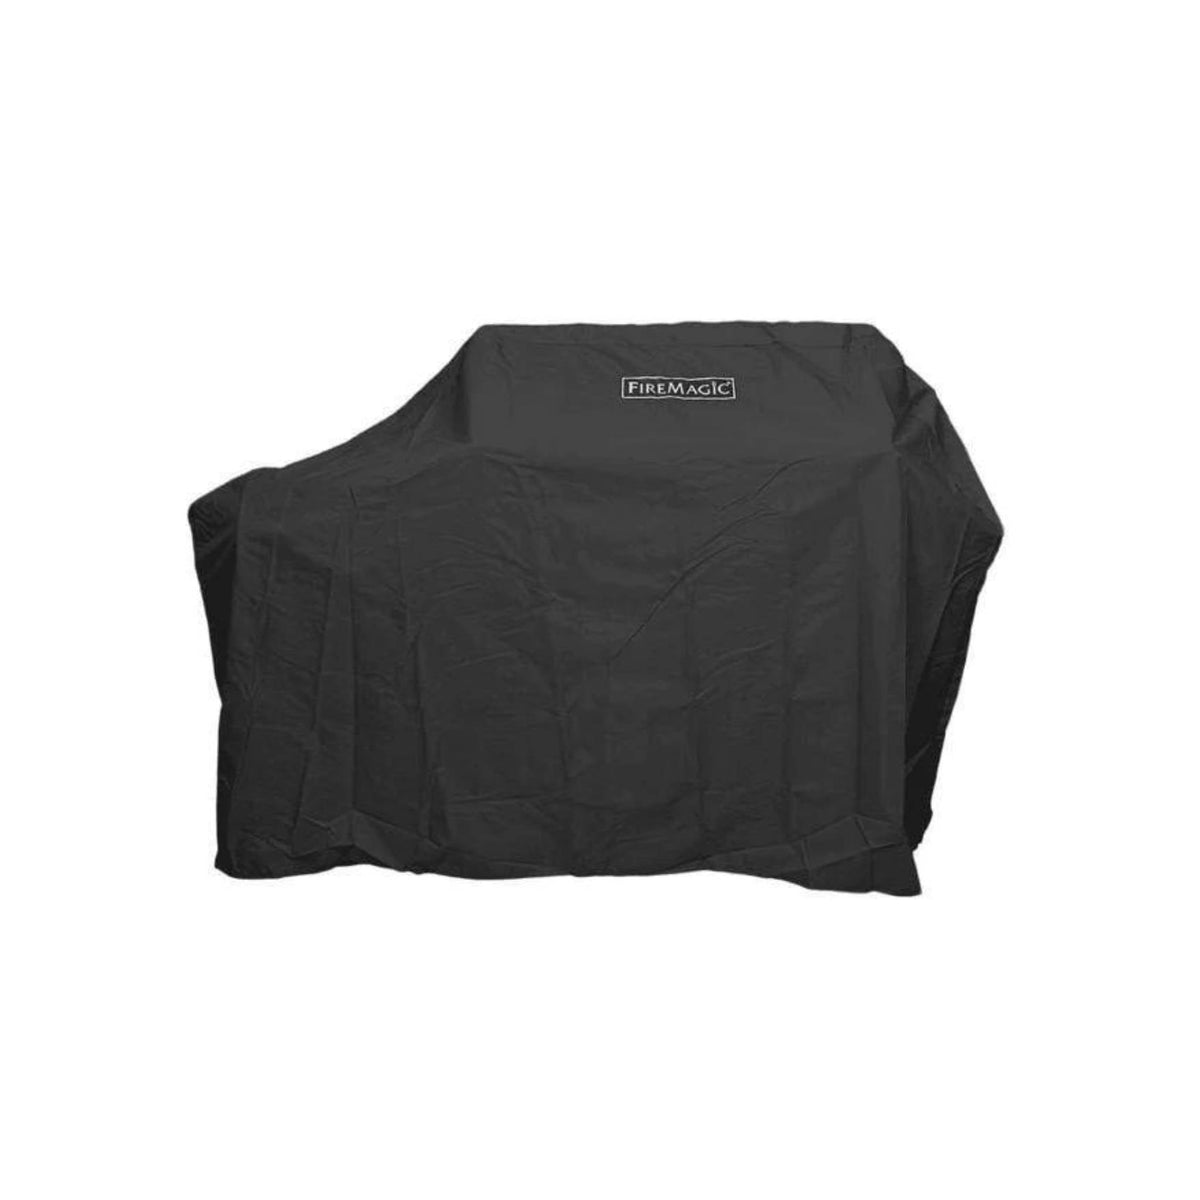 Fire Magic Vinyl Cover for A540s (-62), C540s &amp; RCH Portable Grills 5160-20F